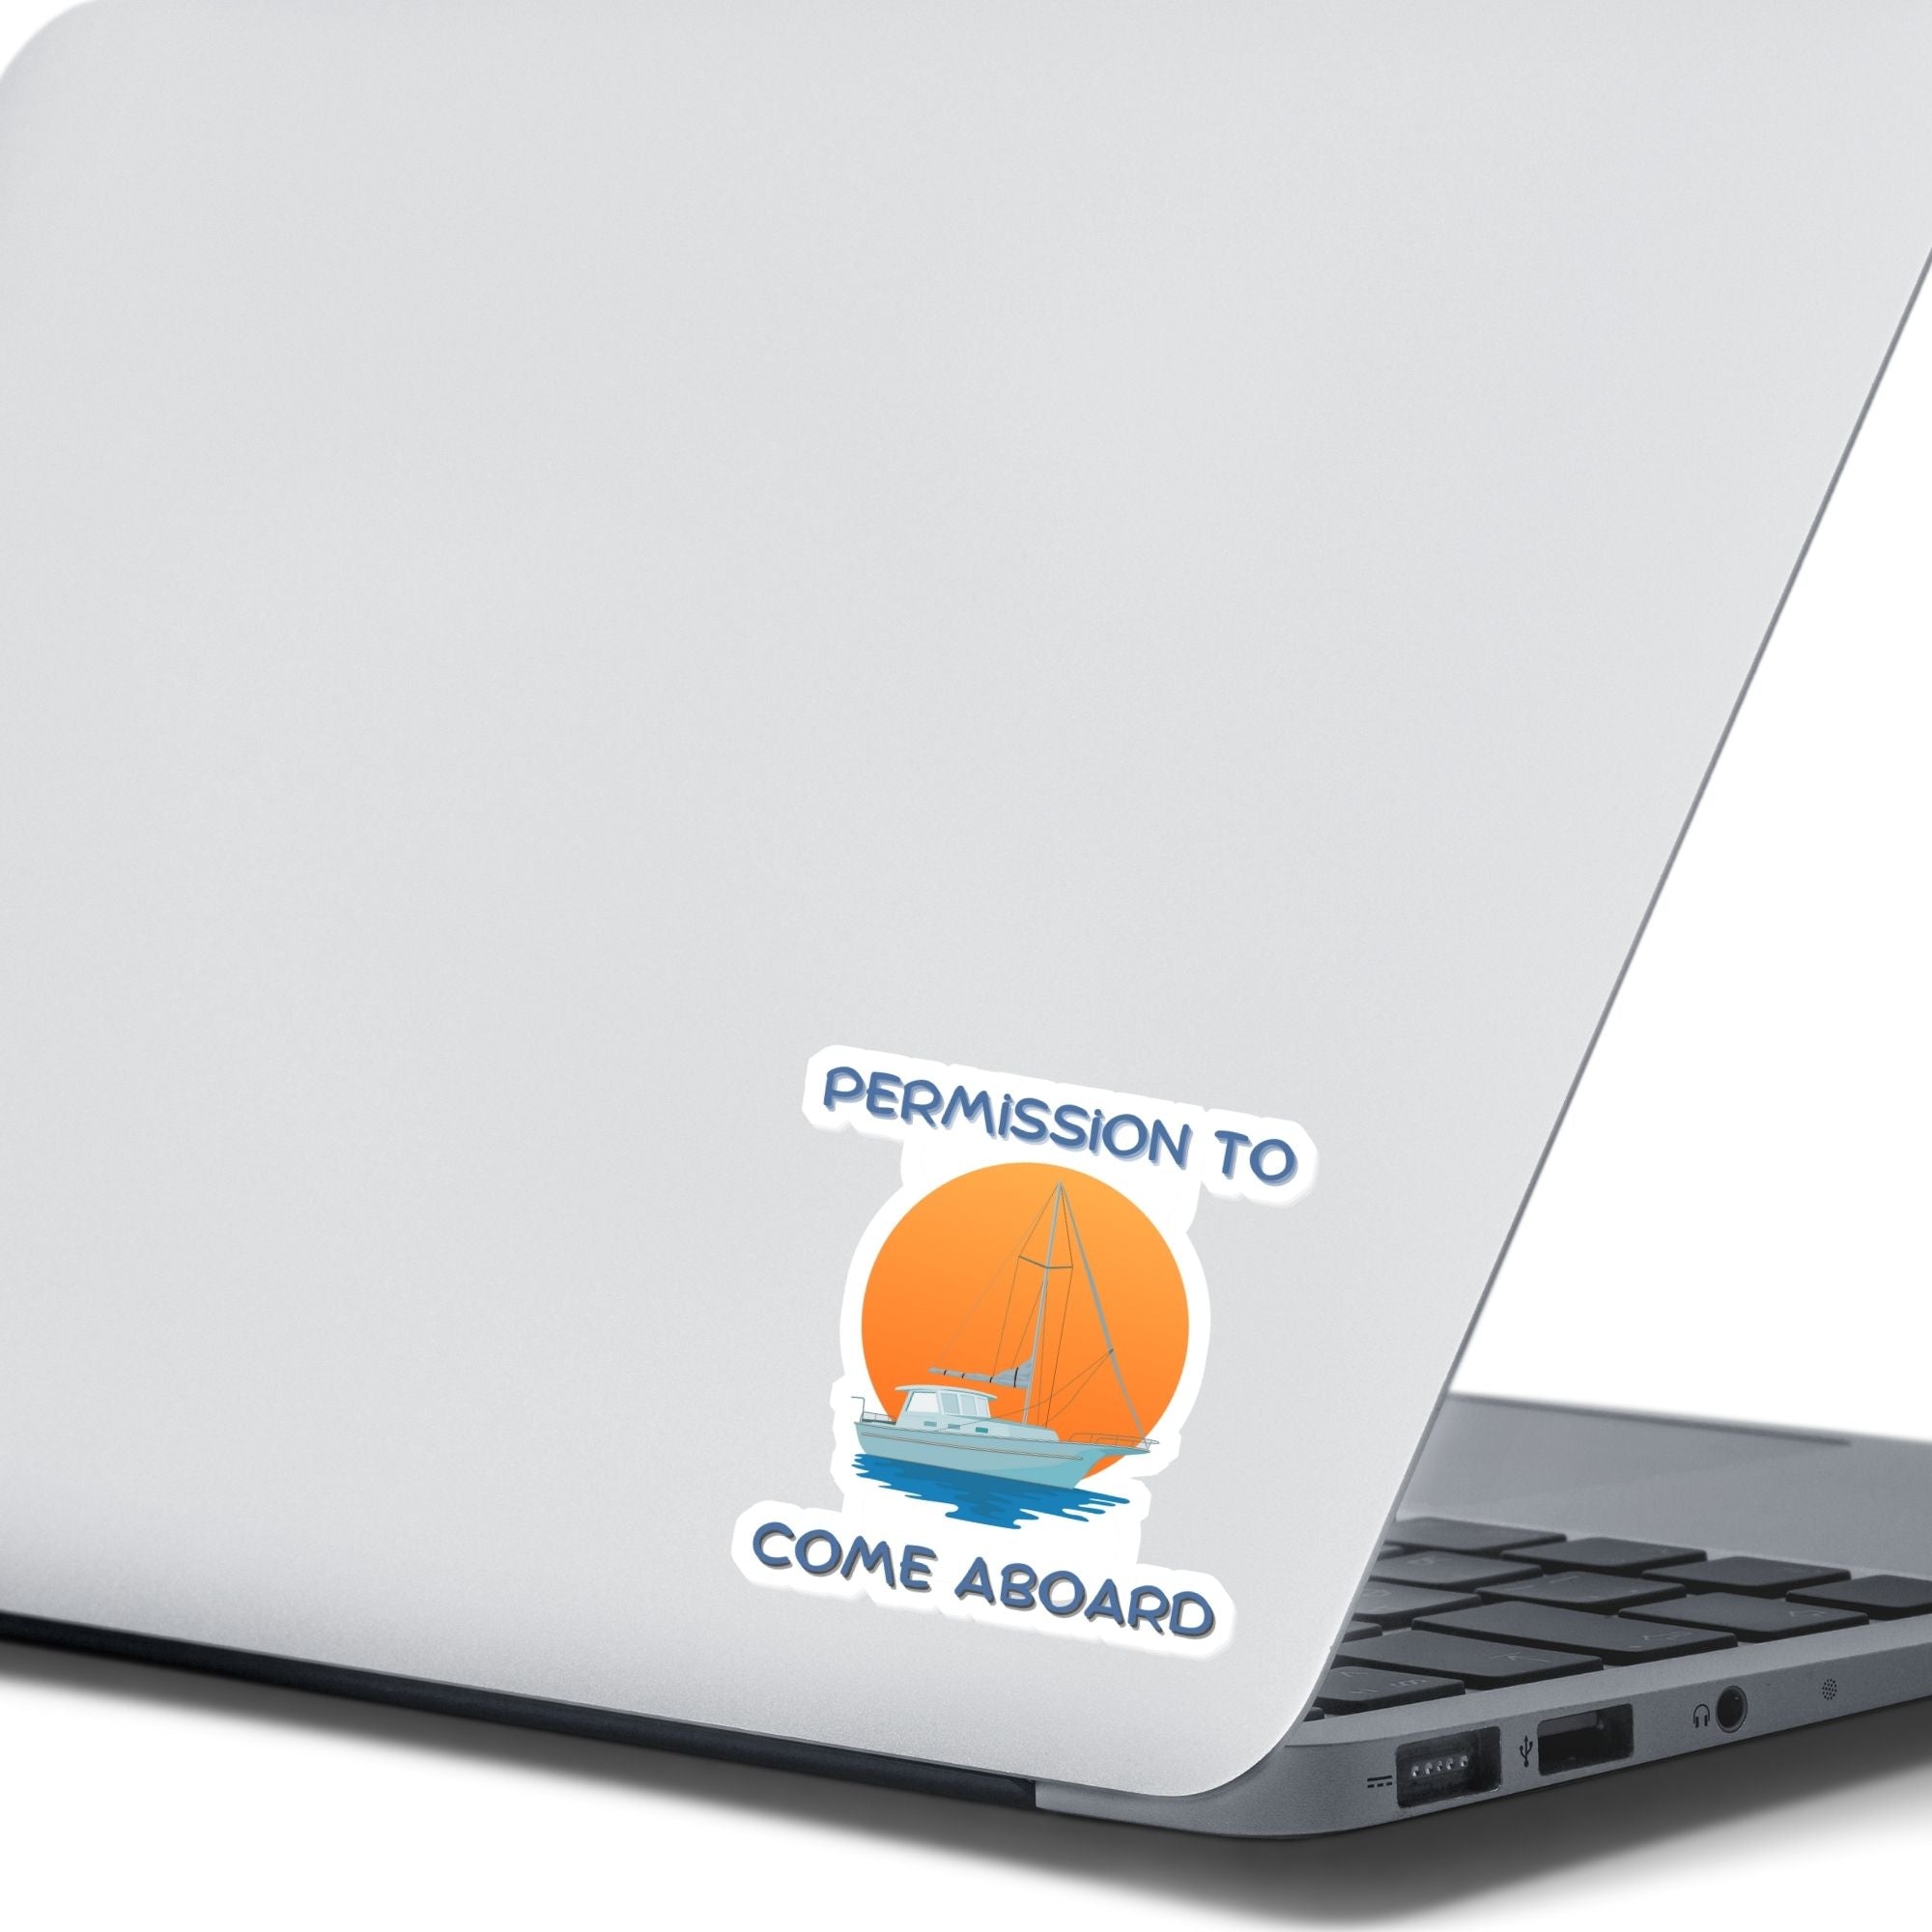 Ahoy Captain, permission to come aboard? This individual die-cut sticker has an anchored sailboat against a beautiful sunset. Perfect for sailors and boaters, this sailing sticker just feels relaxing! This image shows the Permission to Come Aboard die-cut sticker on the back of an open laptop.